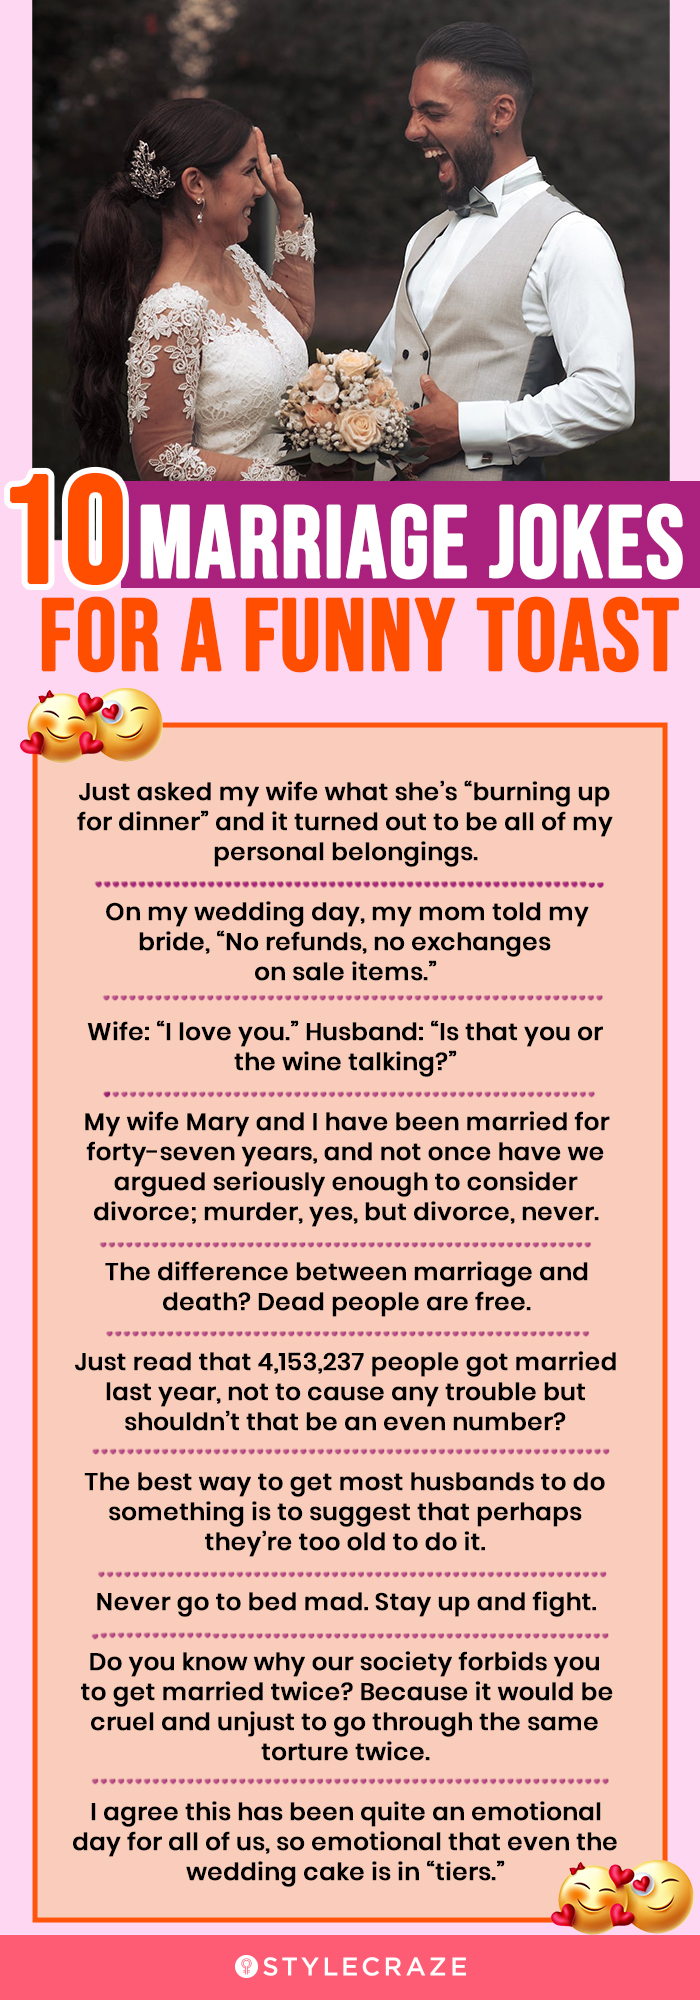 10 marriage jokes for a funny toast (infographic)